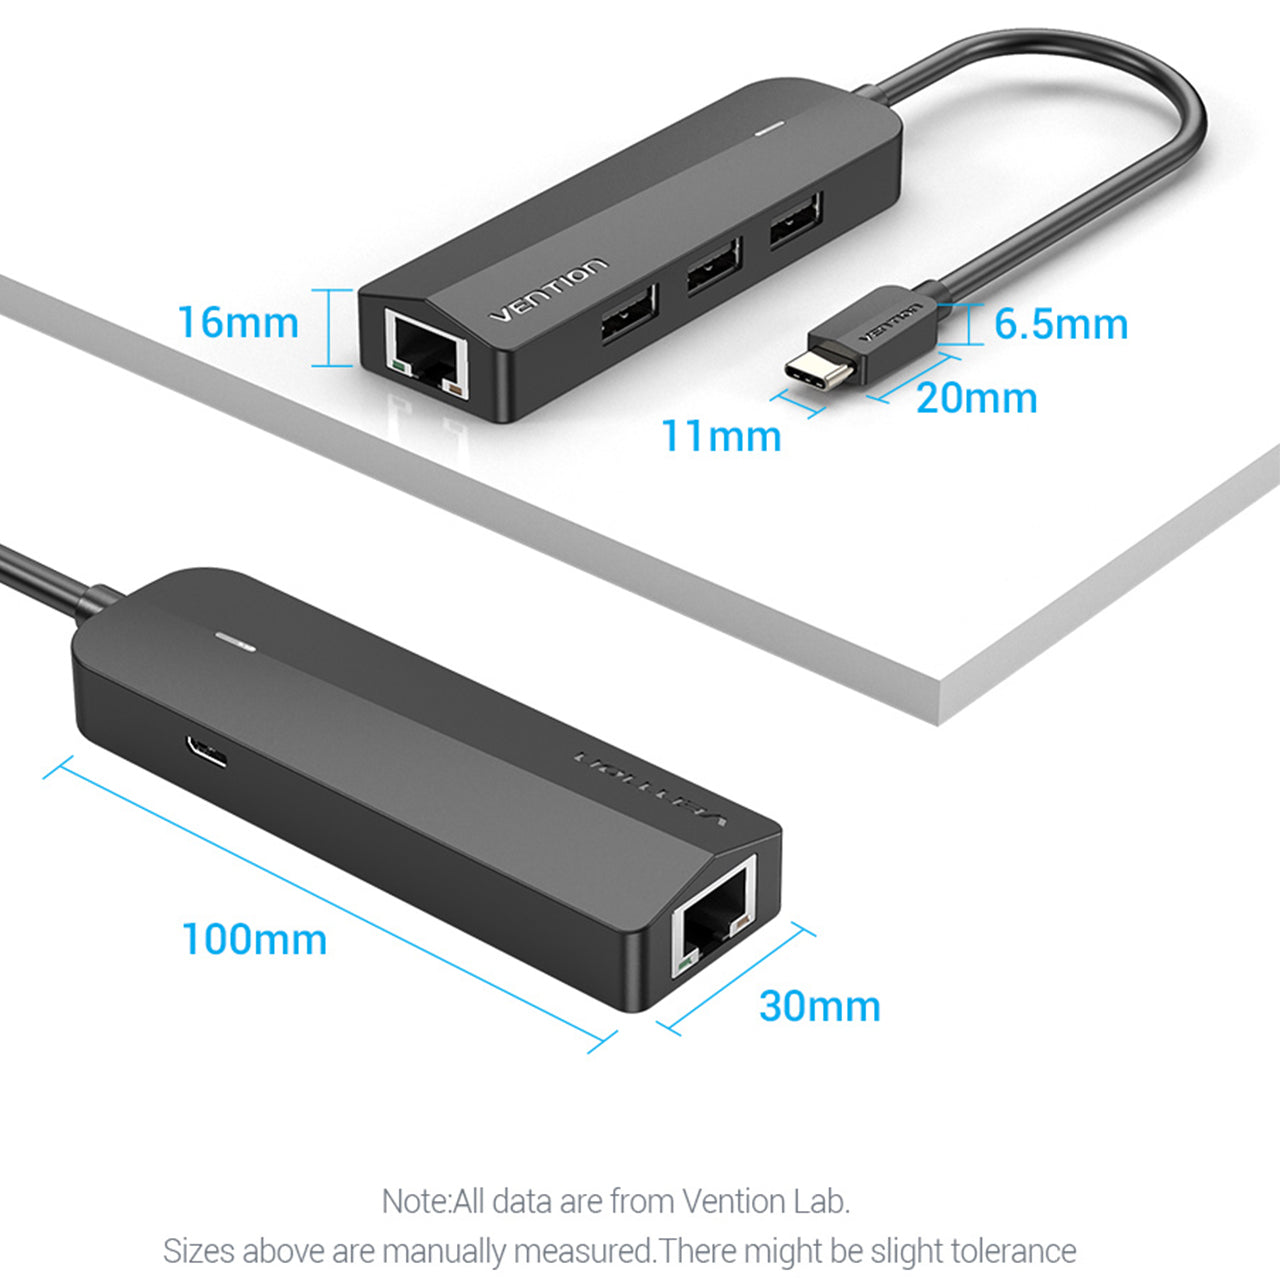 Vention 5 in 1 USB-C Hub 4-Port USB 3.0 Docking Station 5Gbps with RJ45 1000Mbps Network Port and Power Supply Port (TGP)